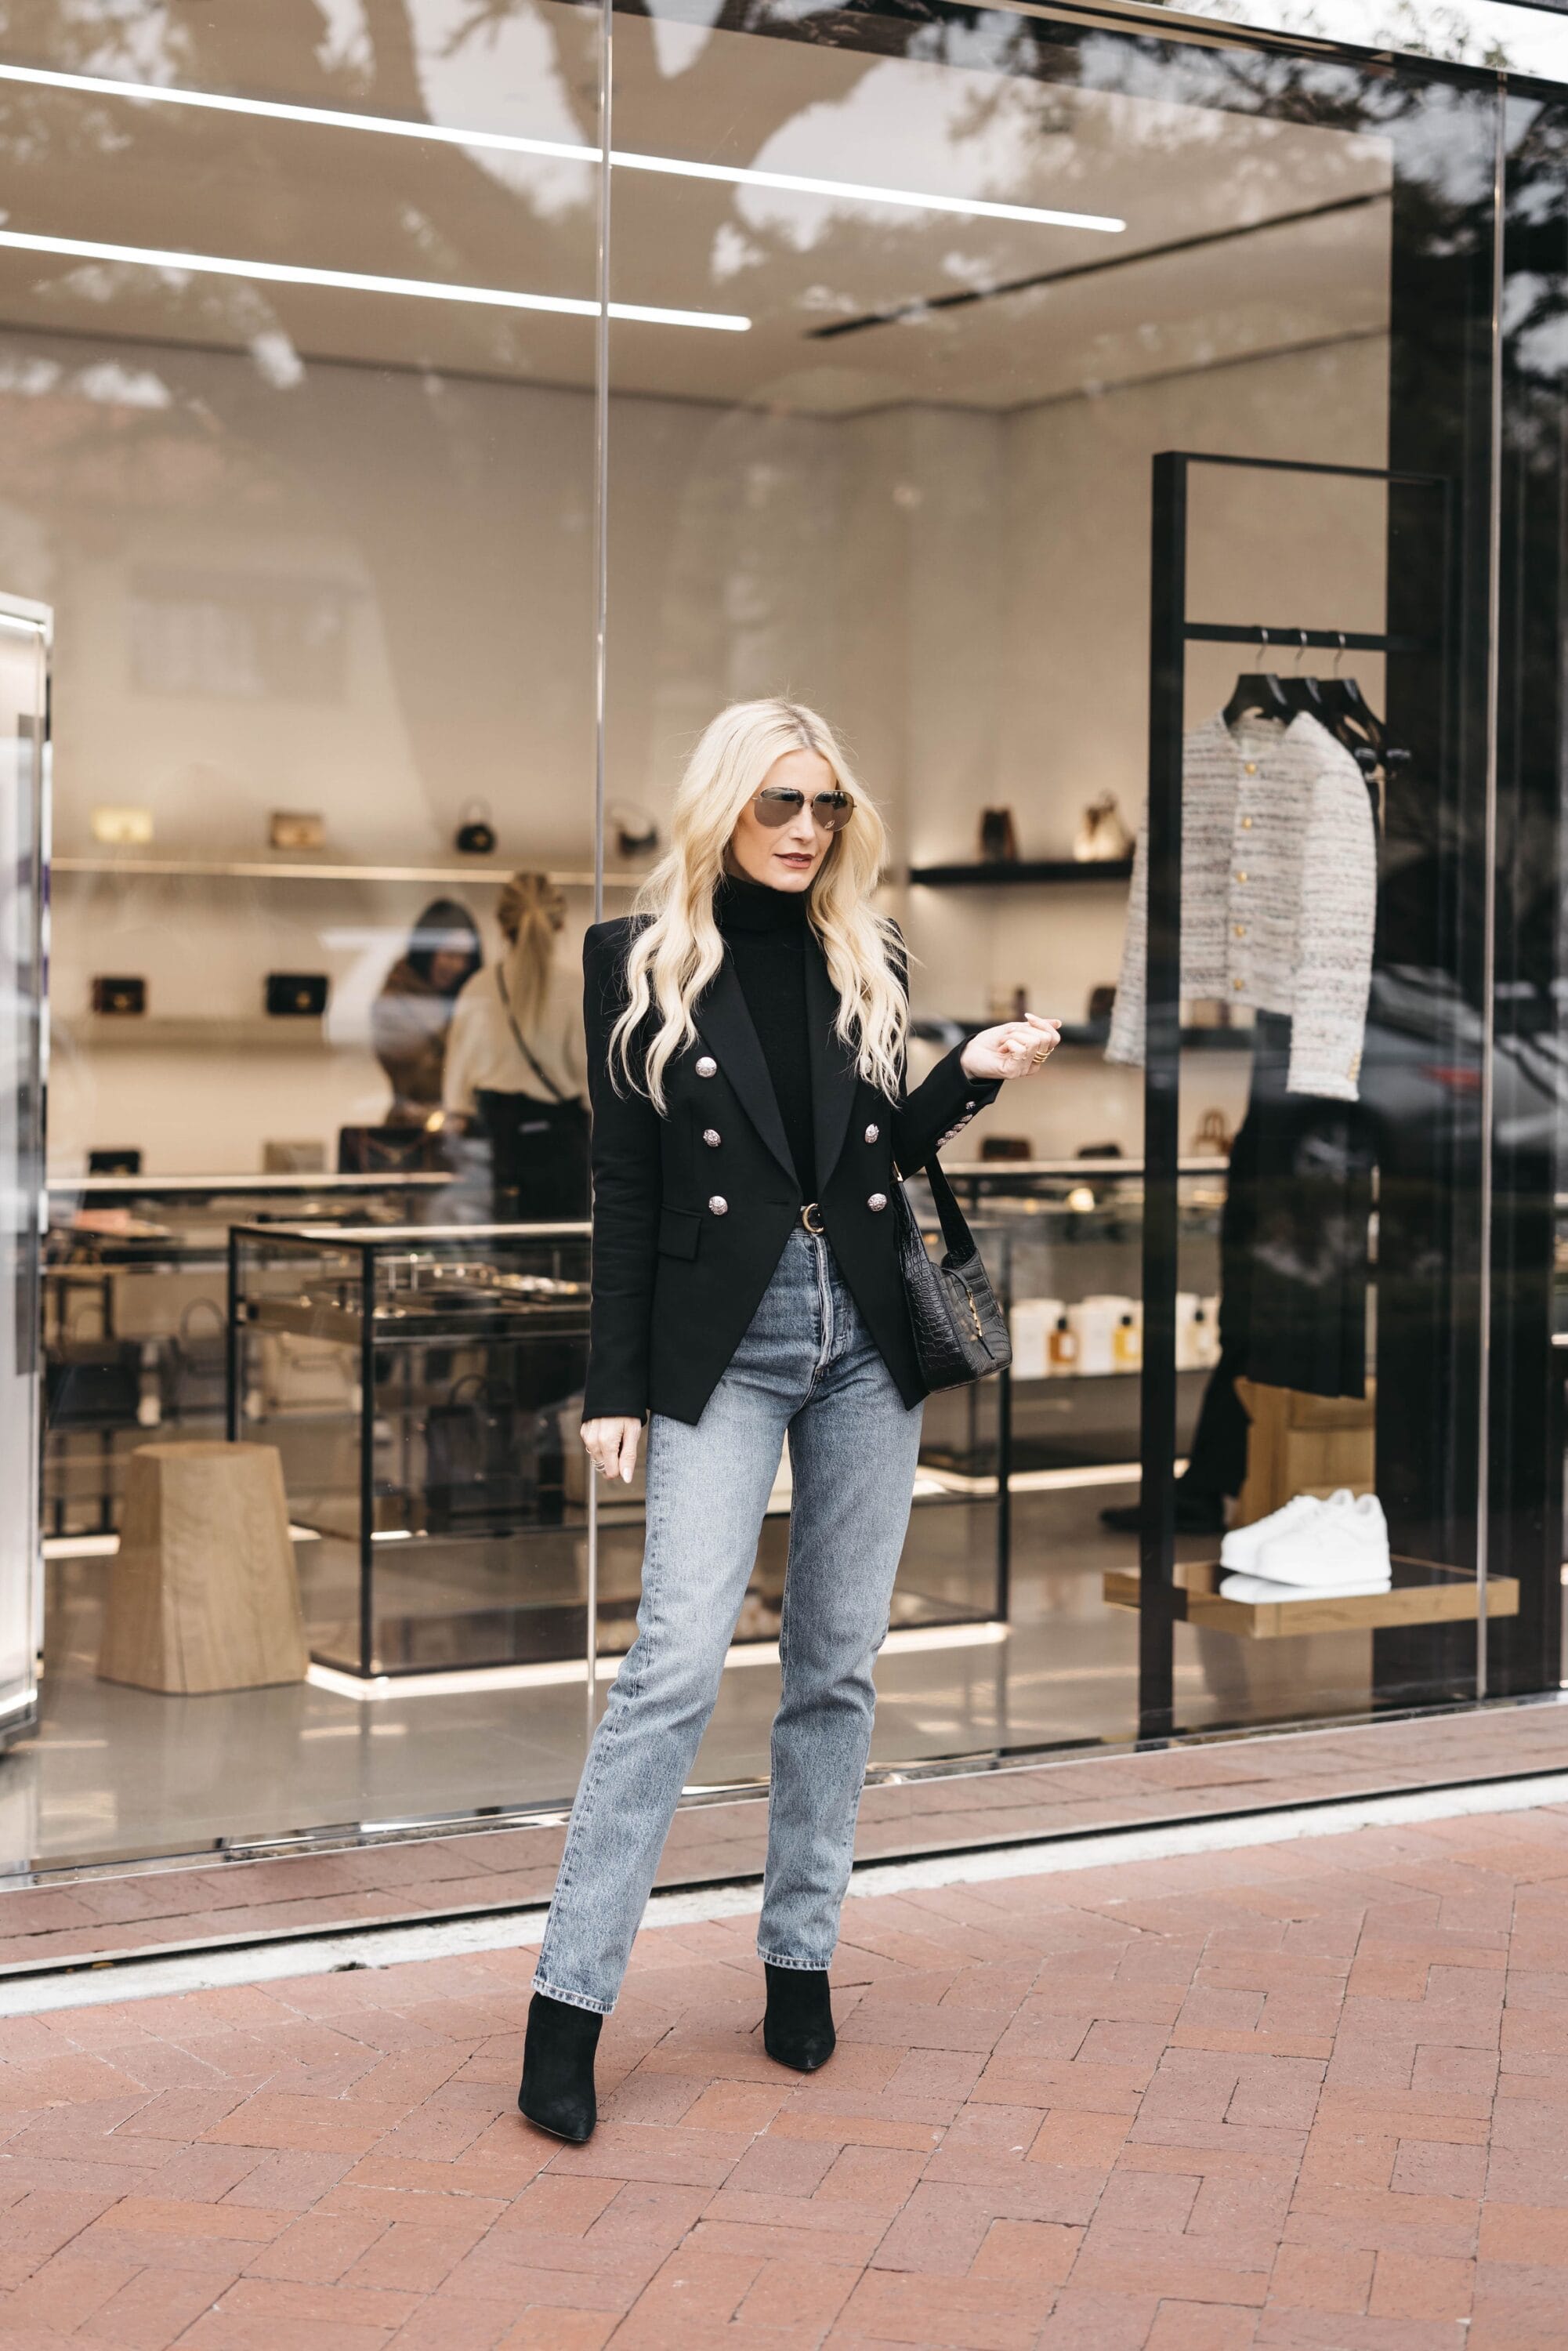 Dallas over 40 fashion blogger wearing black Balmain blazer with agodle 90's pinch waist jeans as one way to stay the wardrobe basics every woman needs.